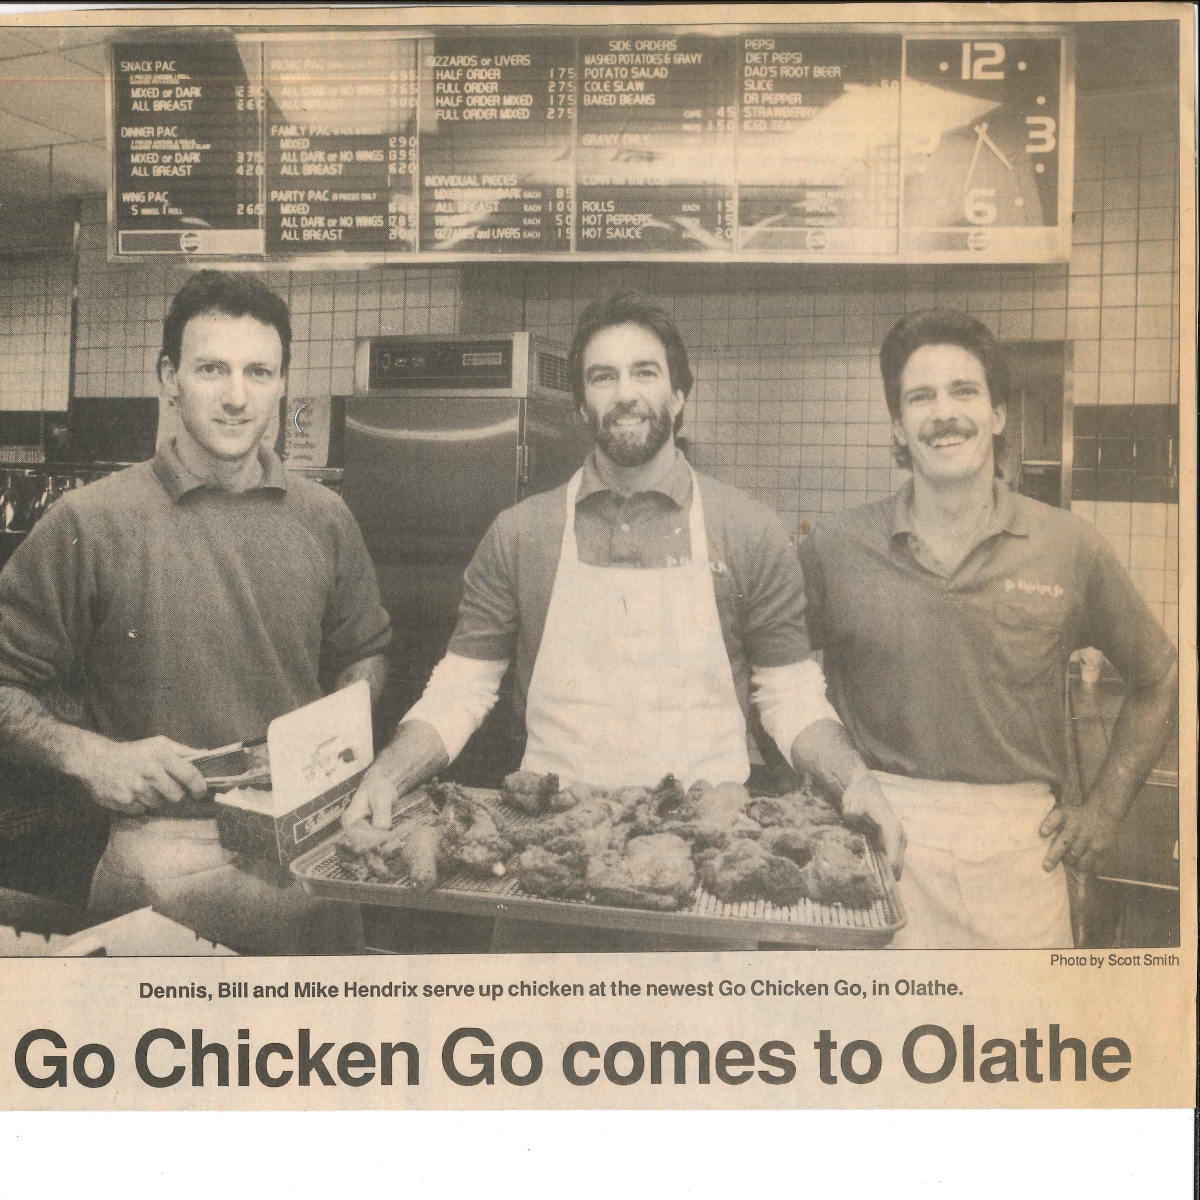 New paper clipping saying "Go Chicken Go comes to Olathe"